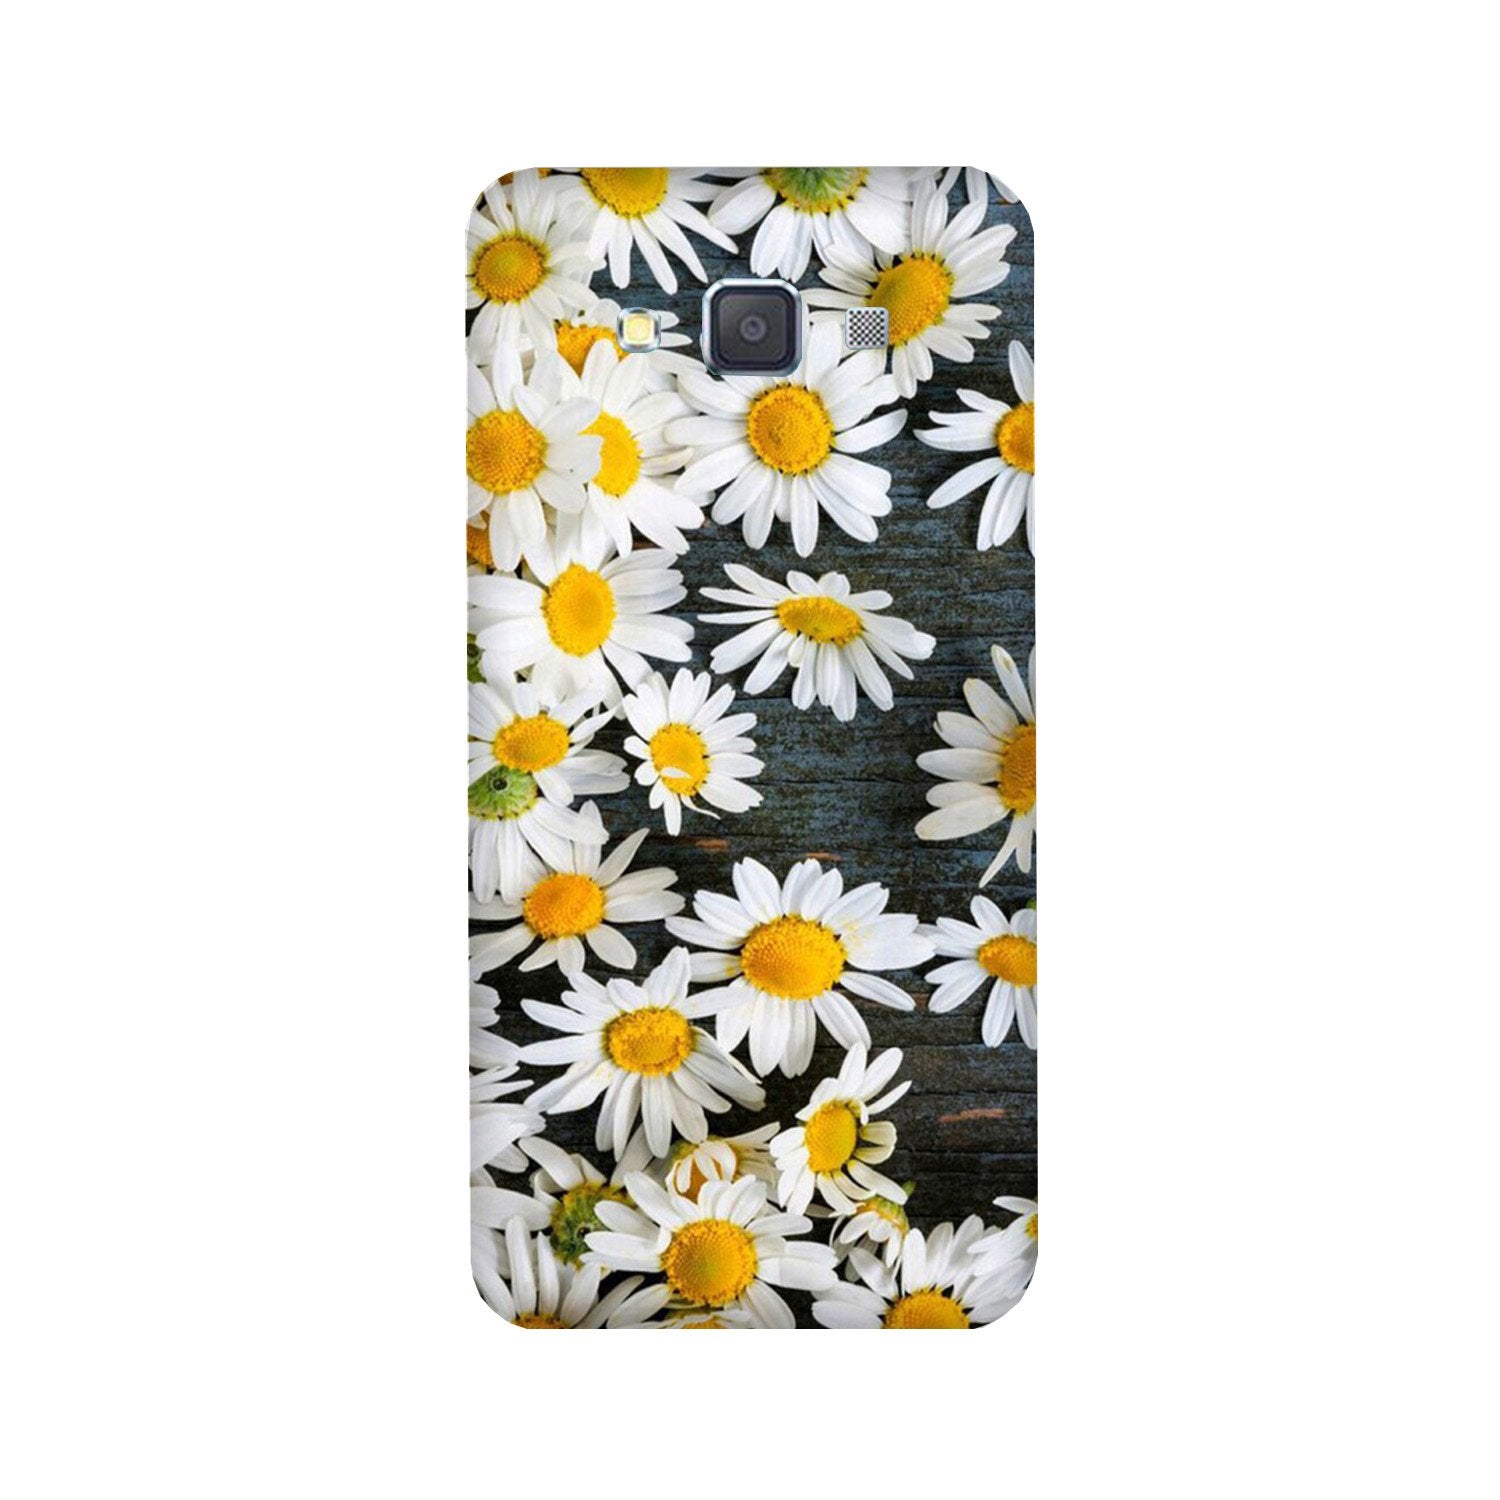 White flowers2 Case for Galaxy E7